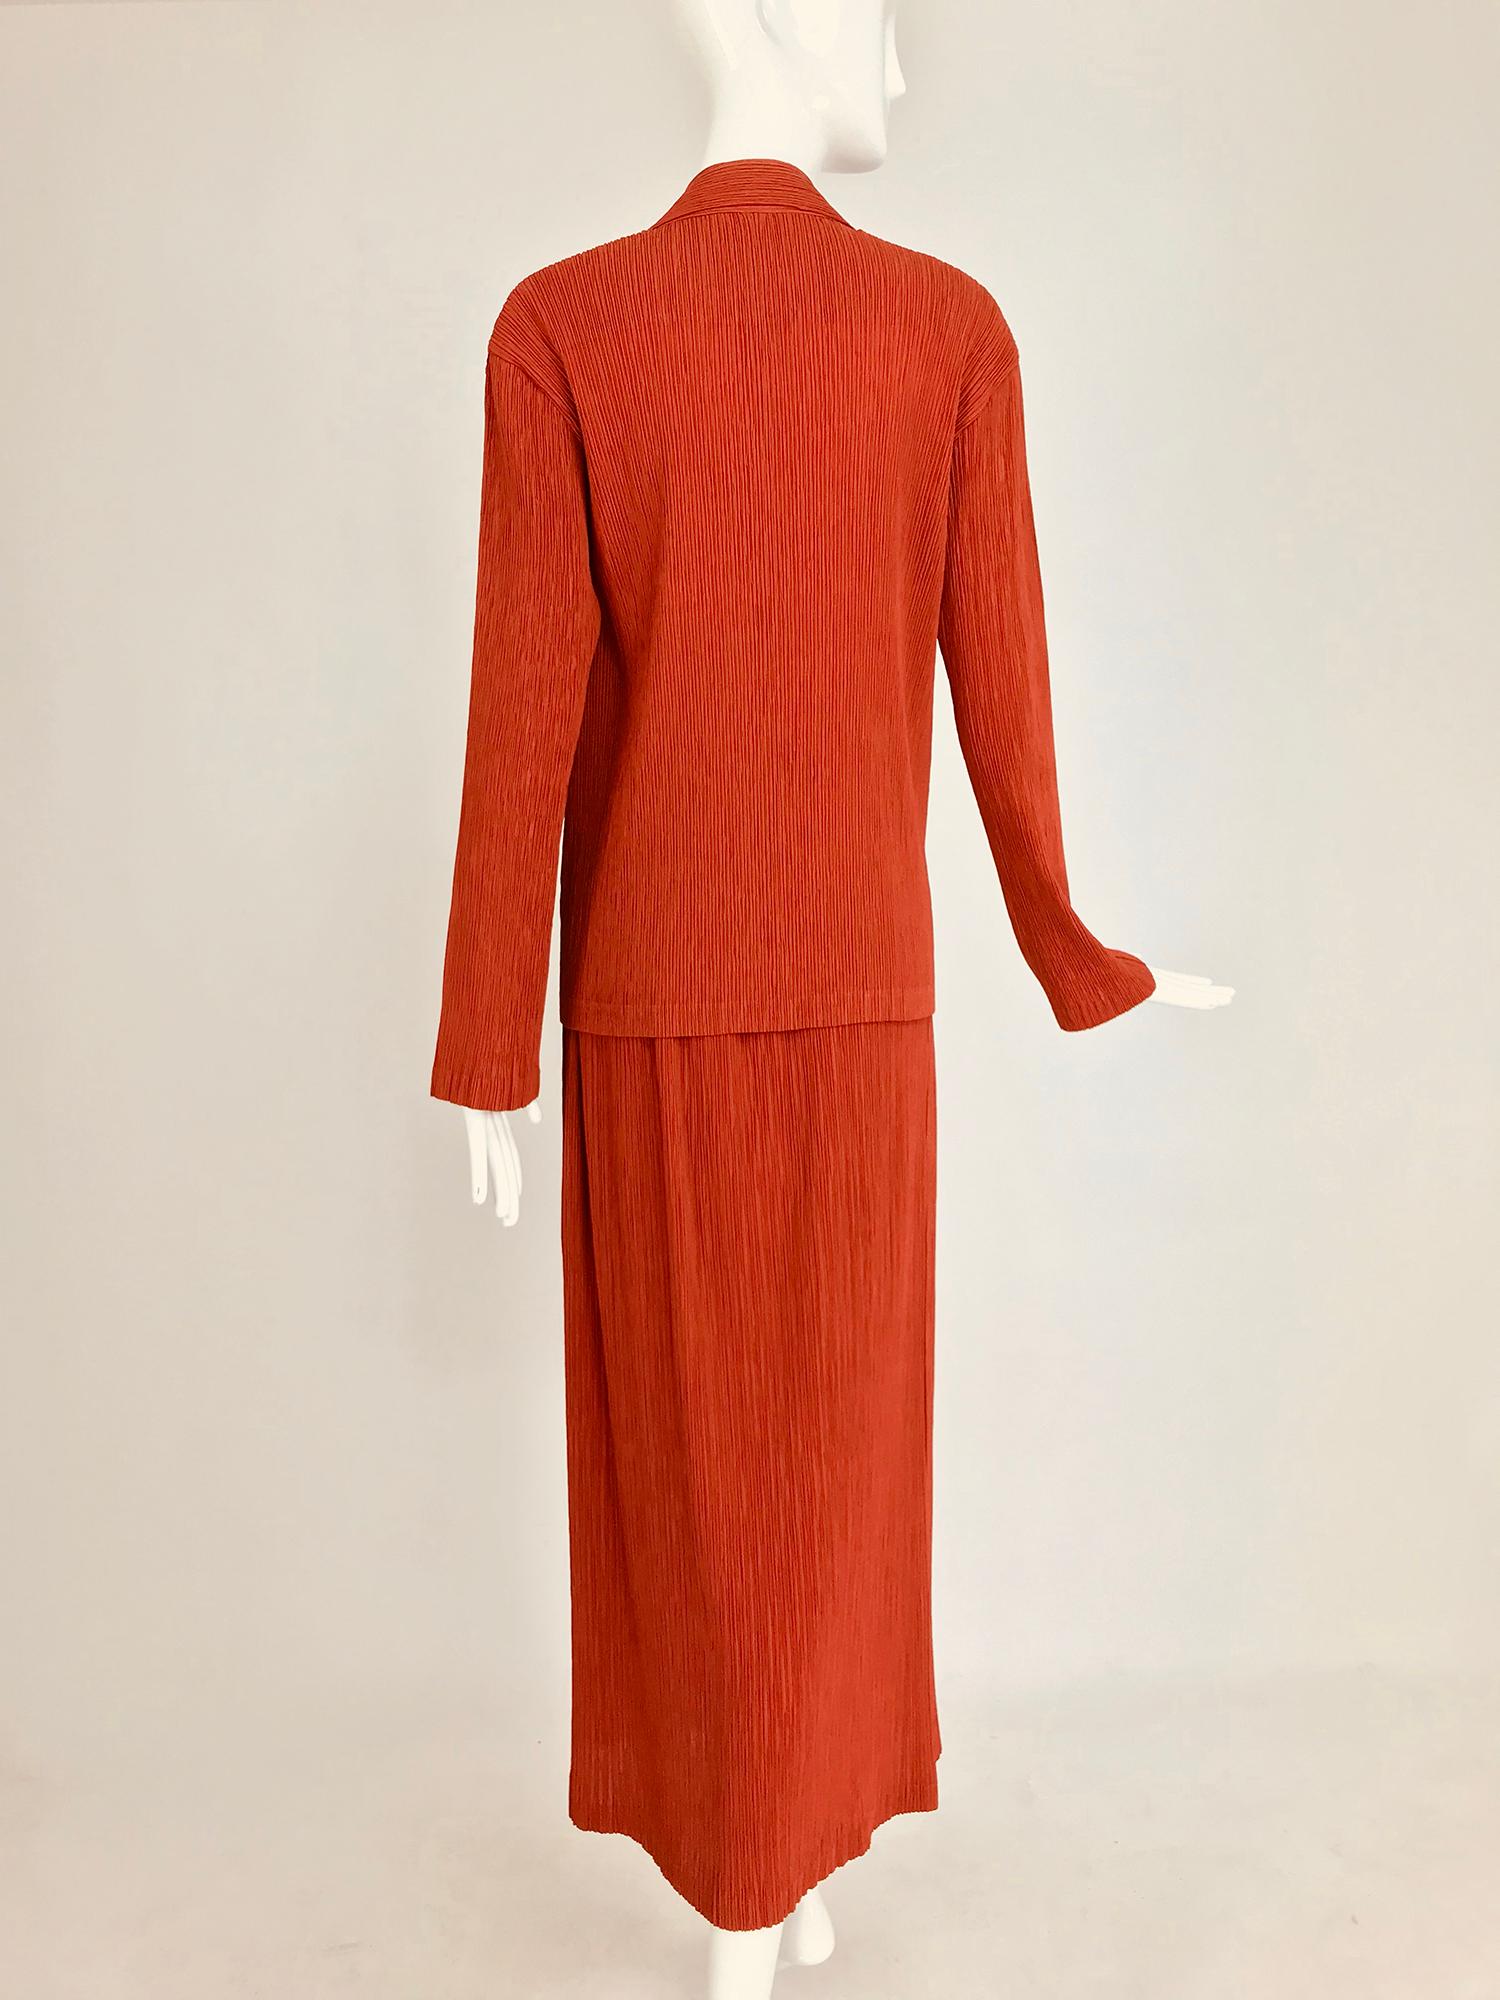 Women's Issey Miyake Fete paprika pleated top and skirt set 